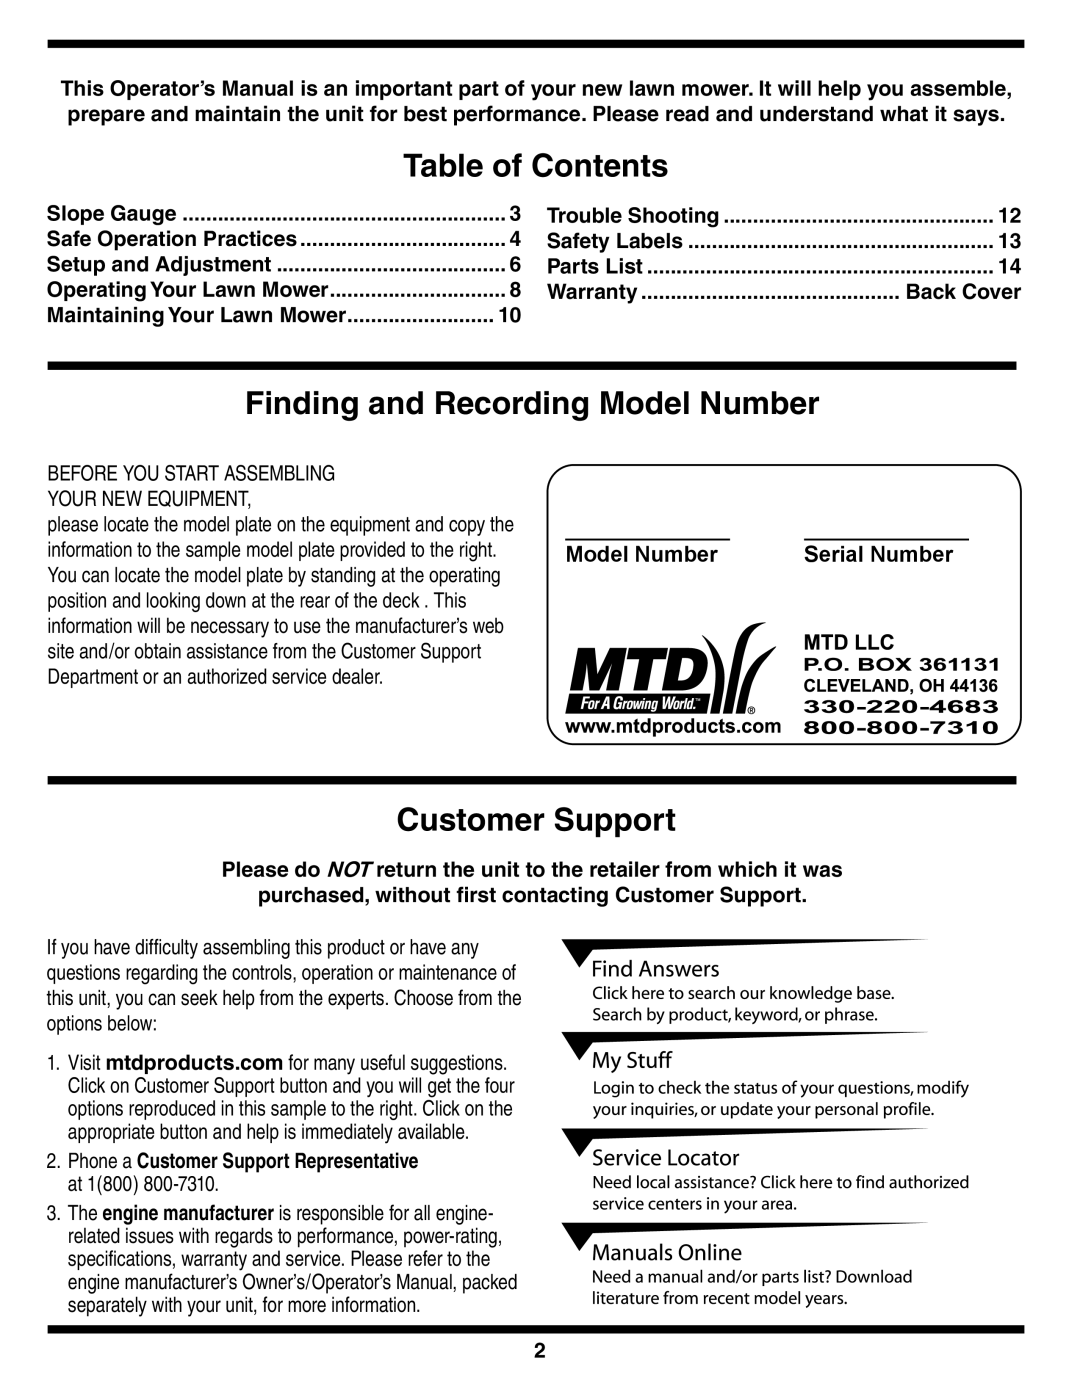 MTD 584 warranty Table of Contents, Finding and Recording Model Number, Customer Support, Serial Number 